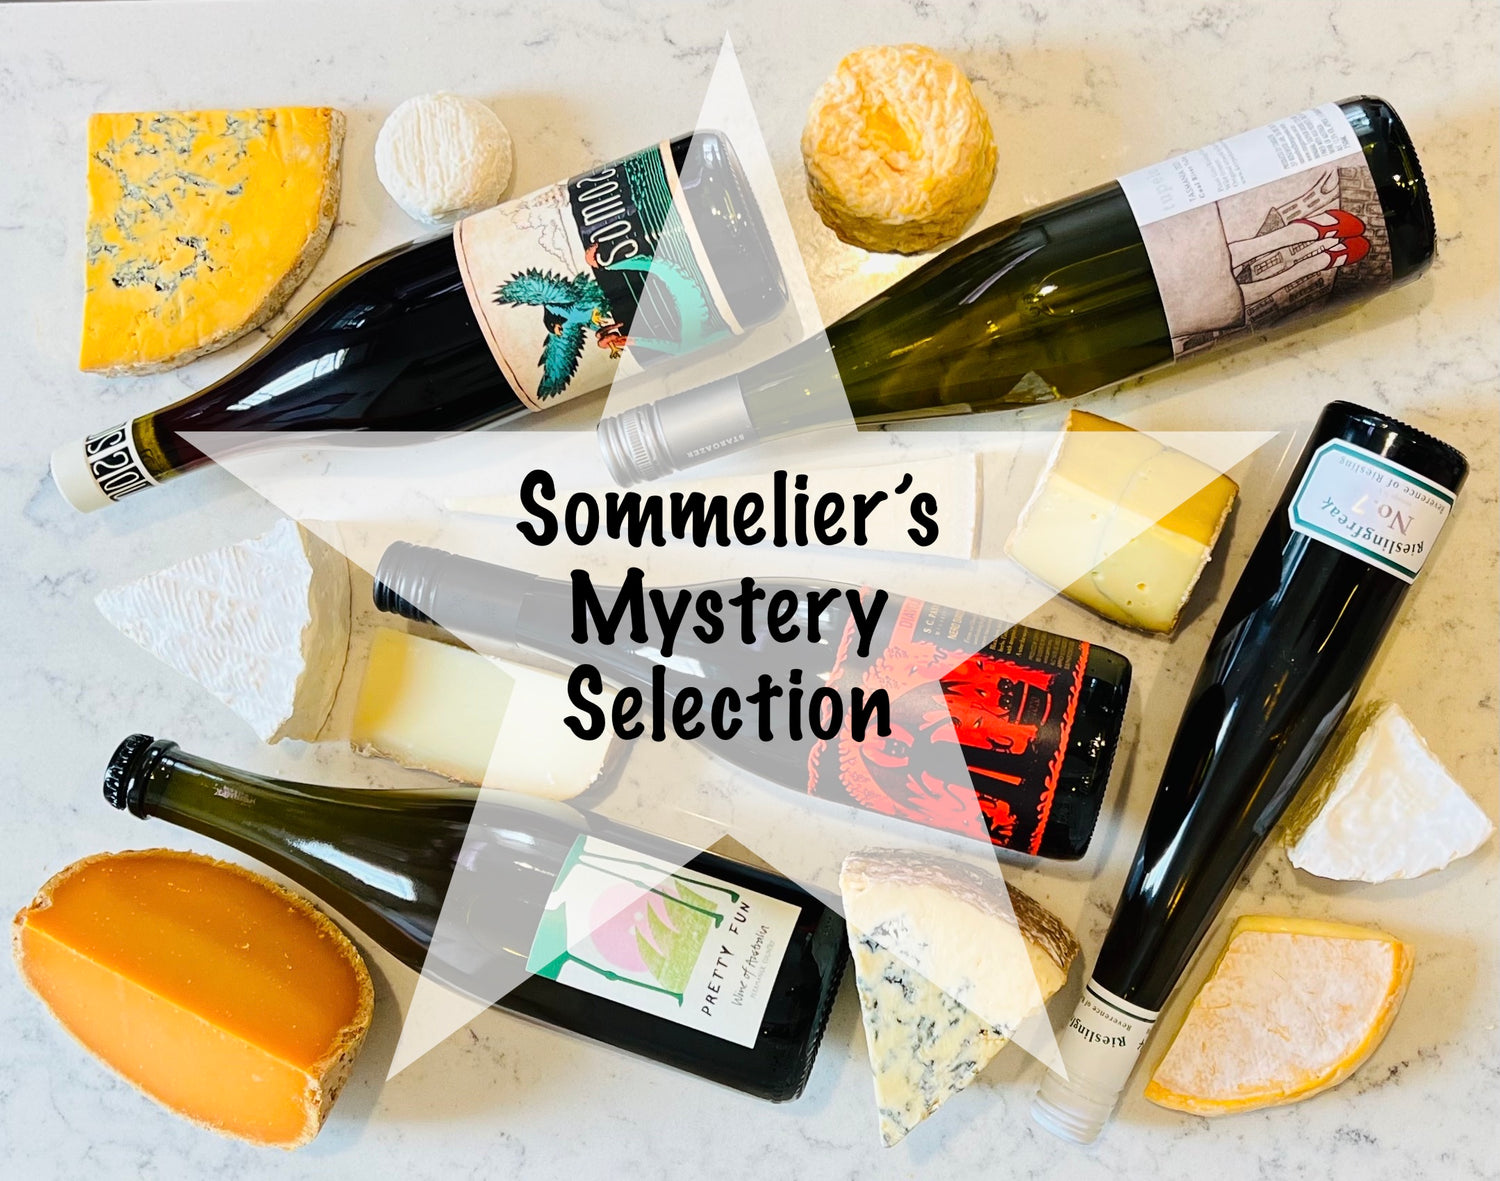 Sommelier's Mystery Selection